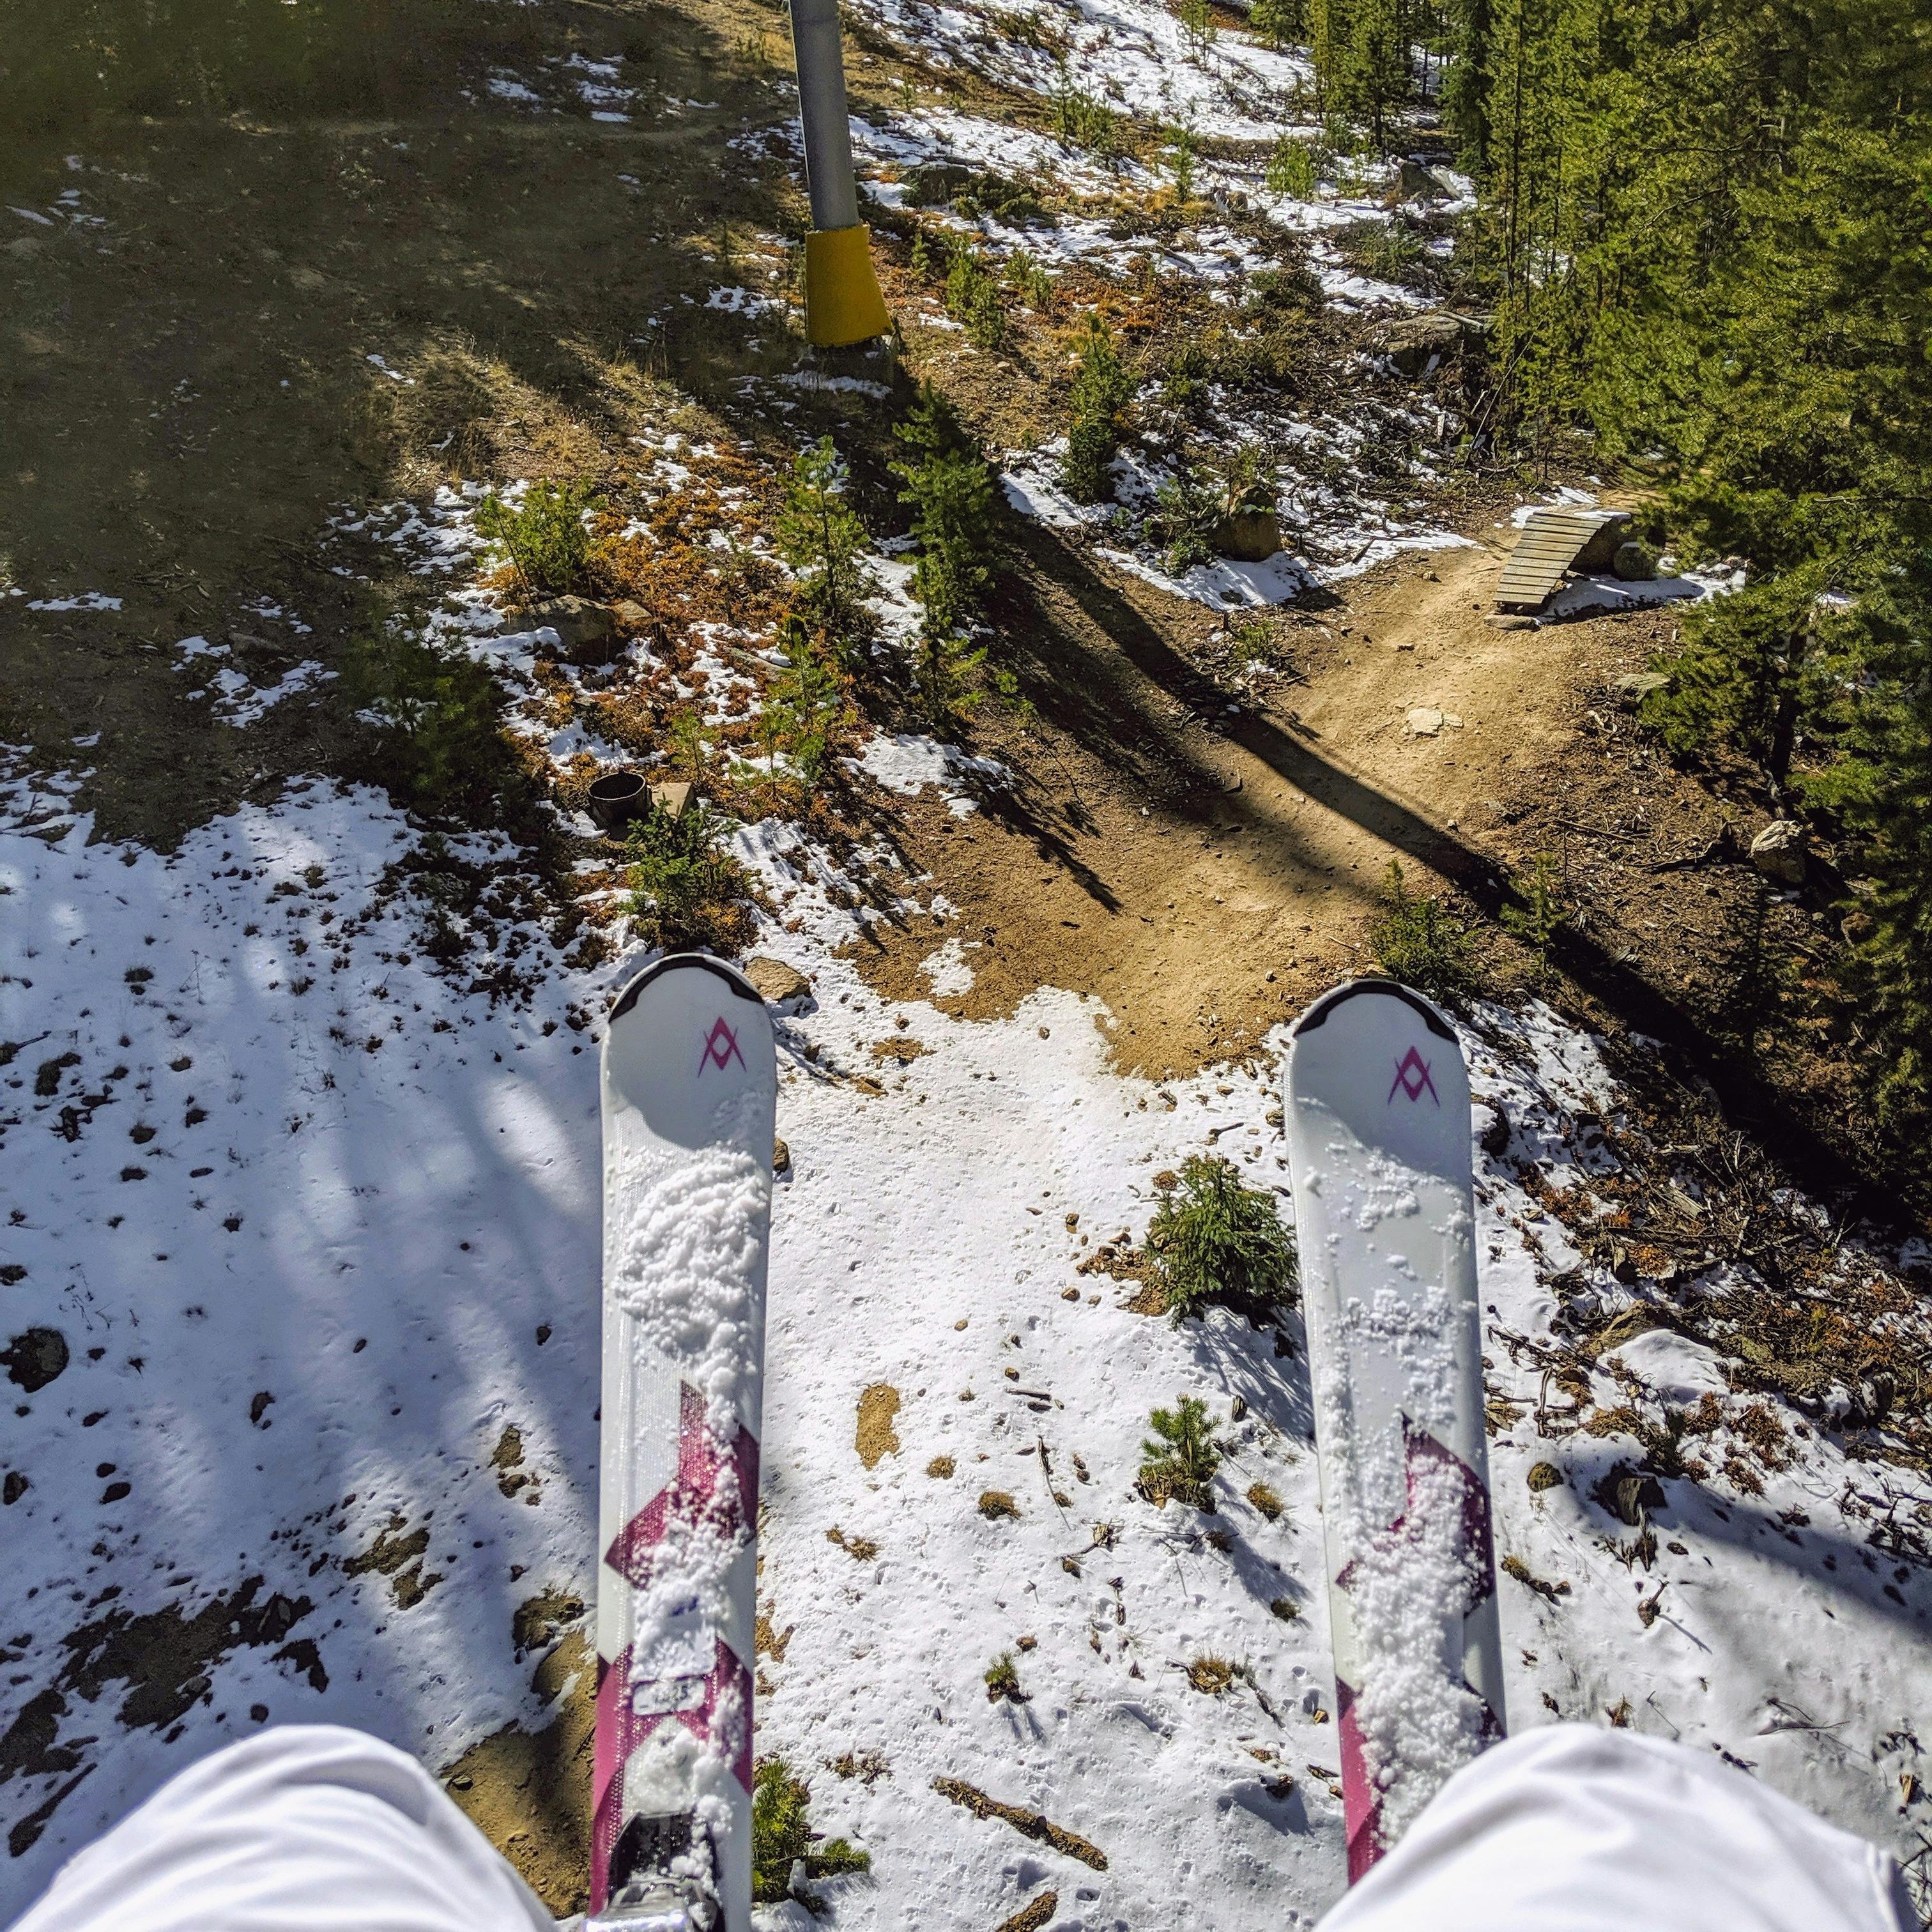 Top down view of a pair of skis as seen from a chairlift above a snowy/dirty ski trail. 